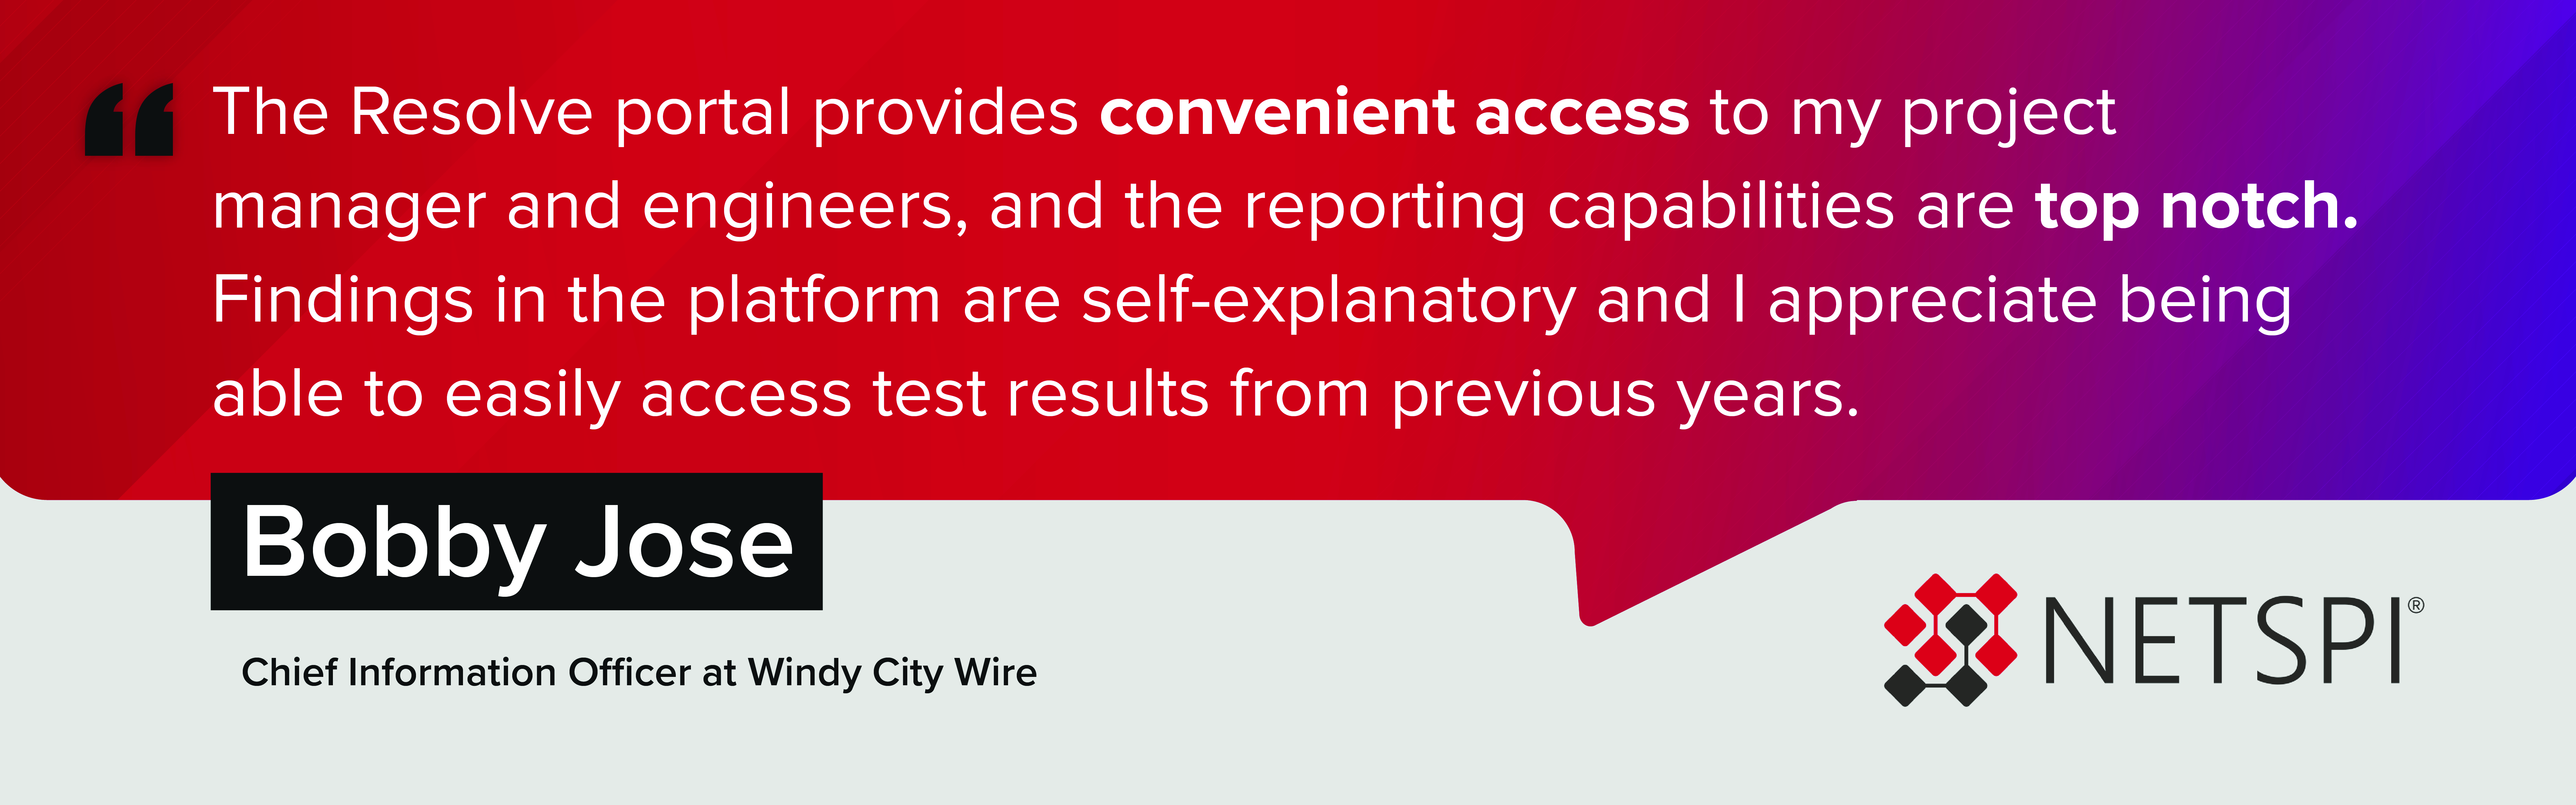 "The Resolve portal provides convenient access to my project manager and engineers, and the reporting capabilities are top notch. Findings in the platform are self-explanatory and I appreciate being able to easily access test results from previous years." – Bobby Jose, Chief Information Officer at Windy City Wire